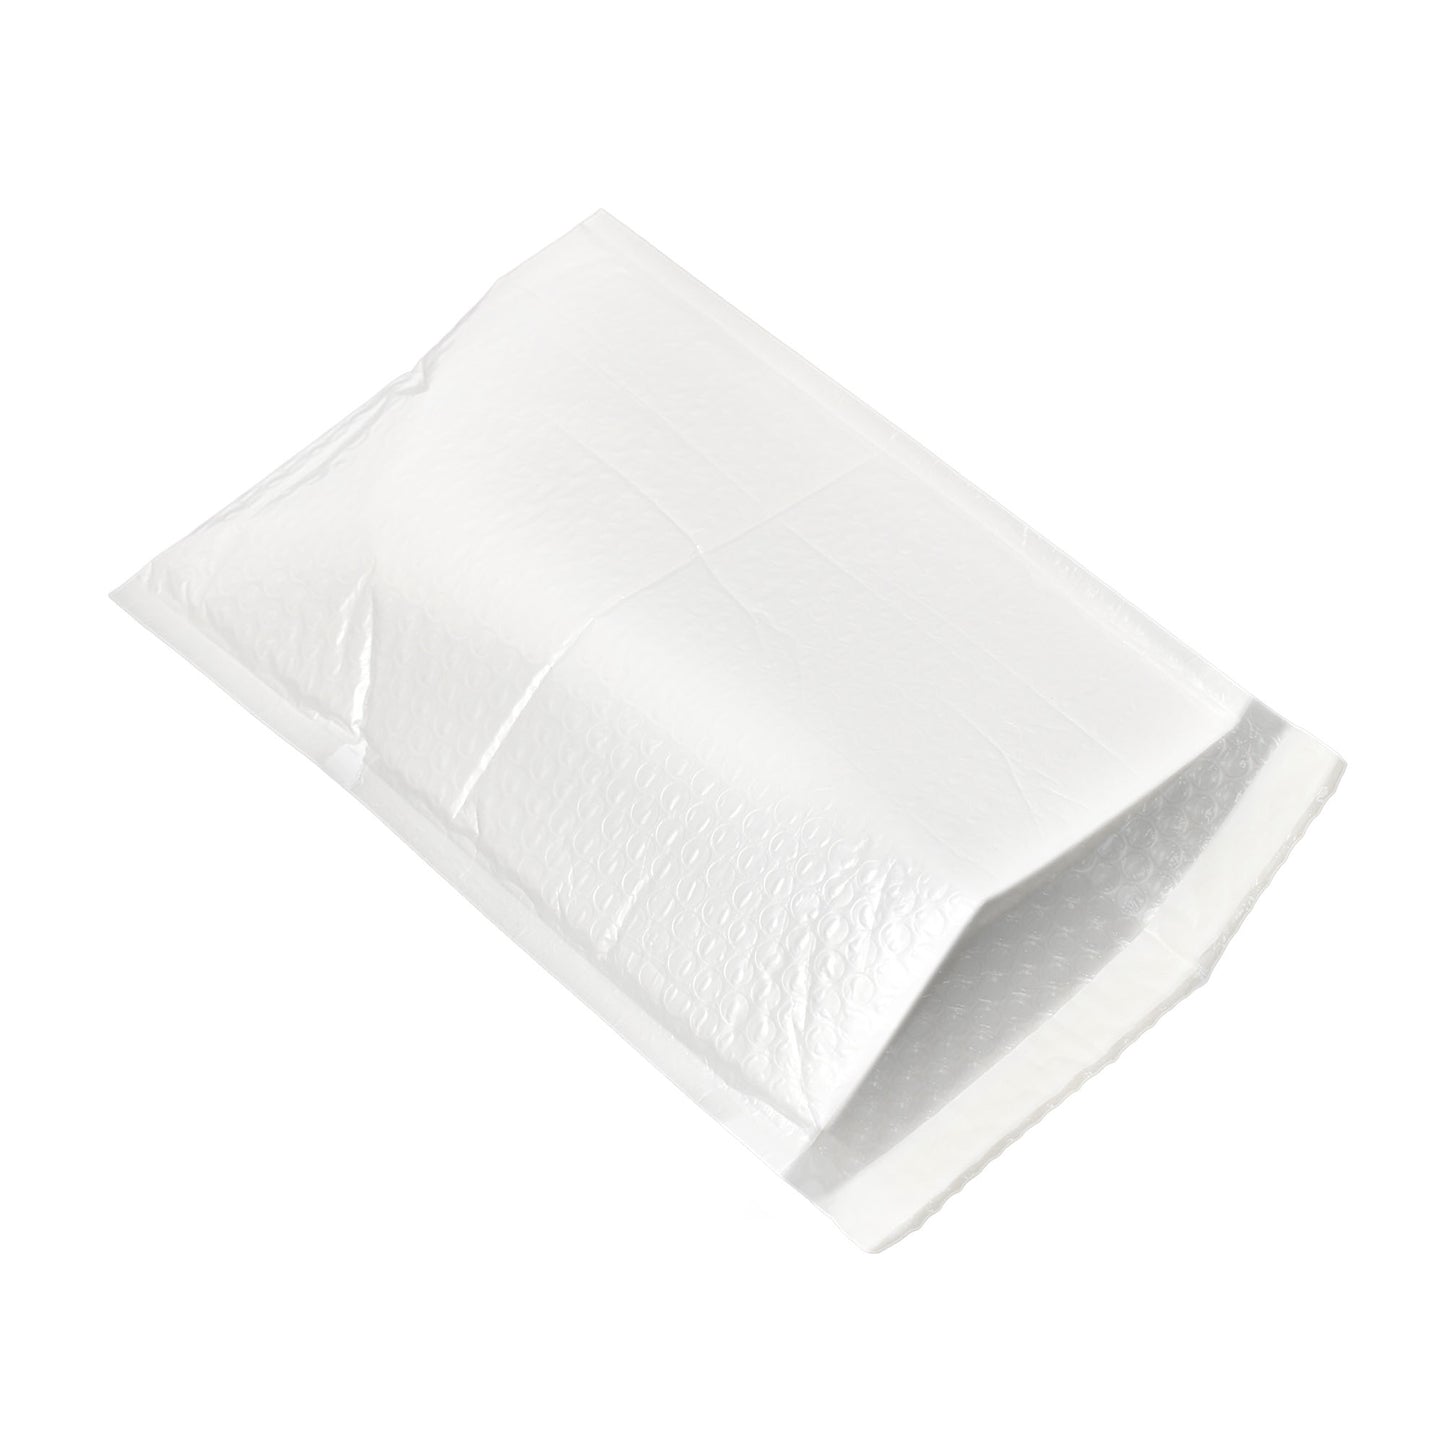 200 Pack Bubble Poly Mailer, 9”x12” (White/Gray) - Self Sealing Cushioned Mailing Bag